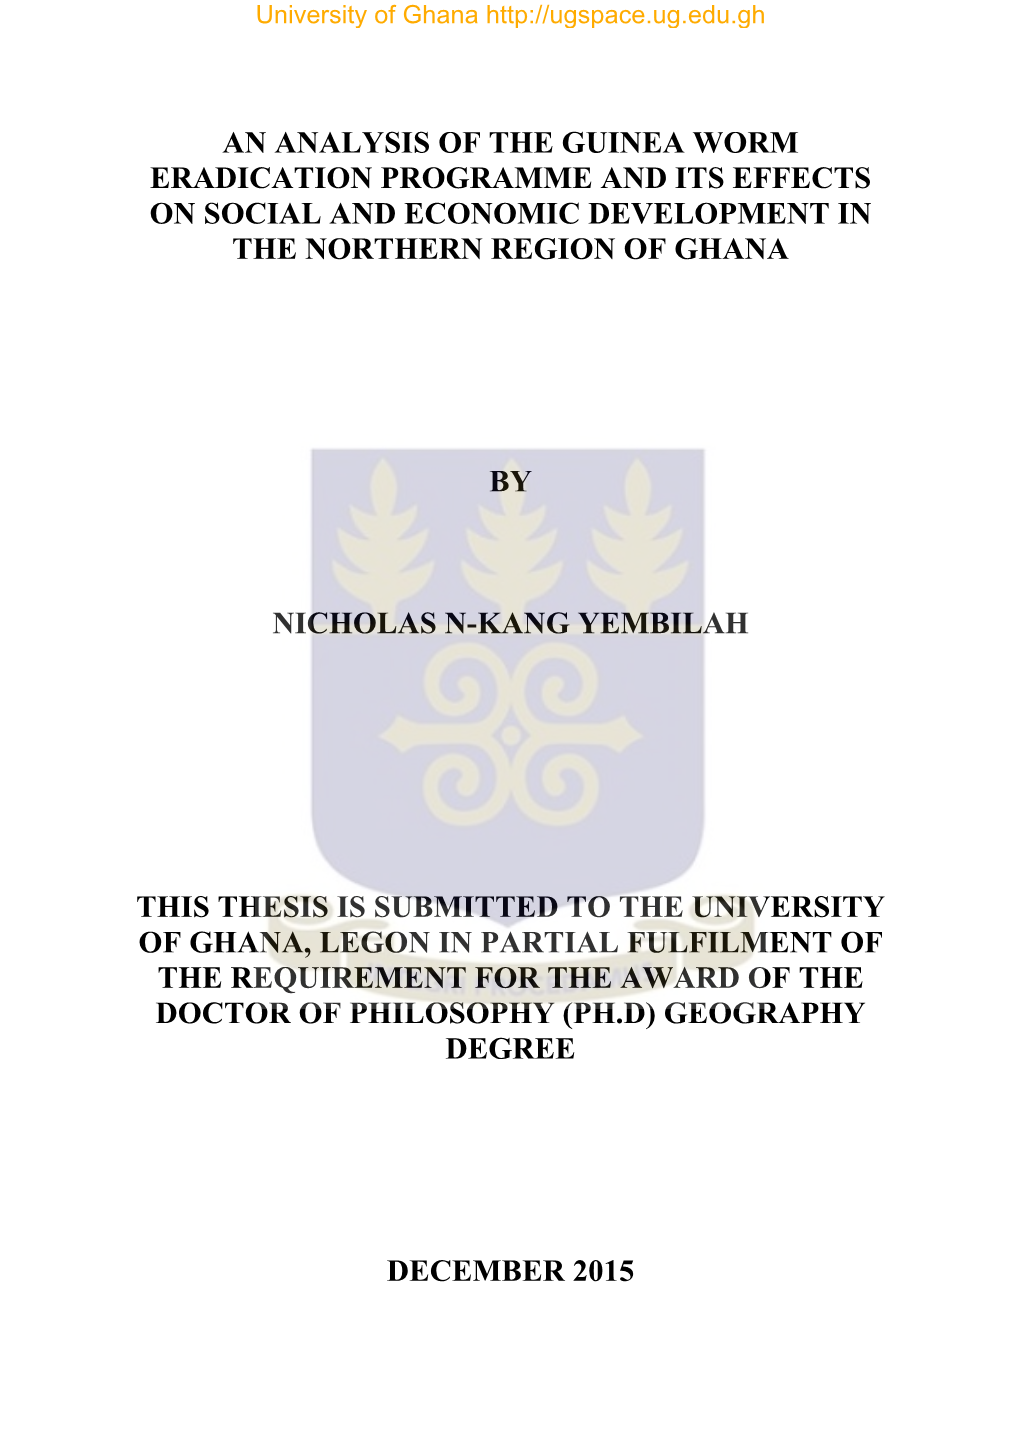 An Analysis of the Guinea Worm Eradication Programme and Its Effects on Social and Economic Development in the Northern Region of Ghana